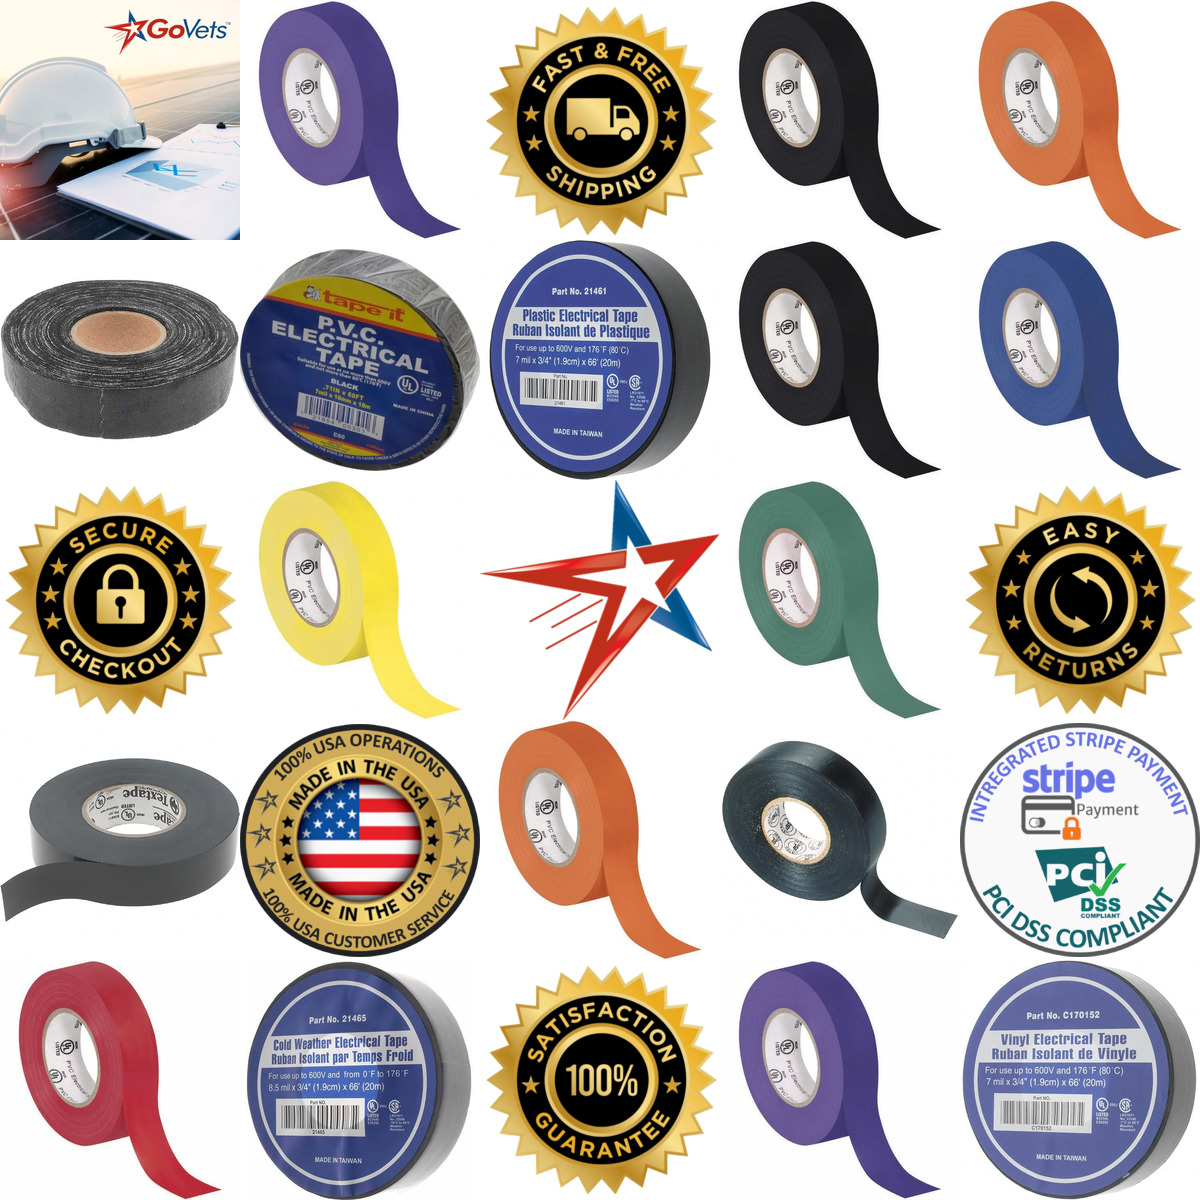 A selection of Value Collection products on GoVets